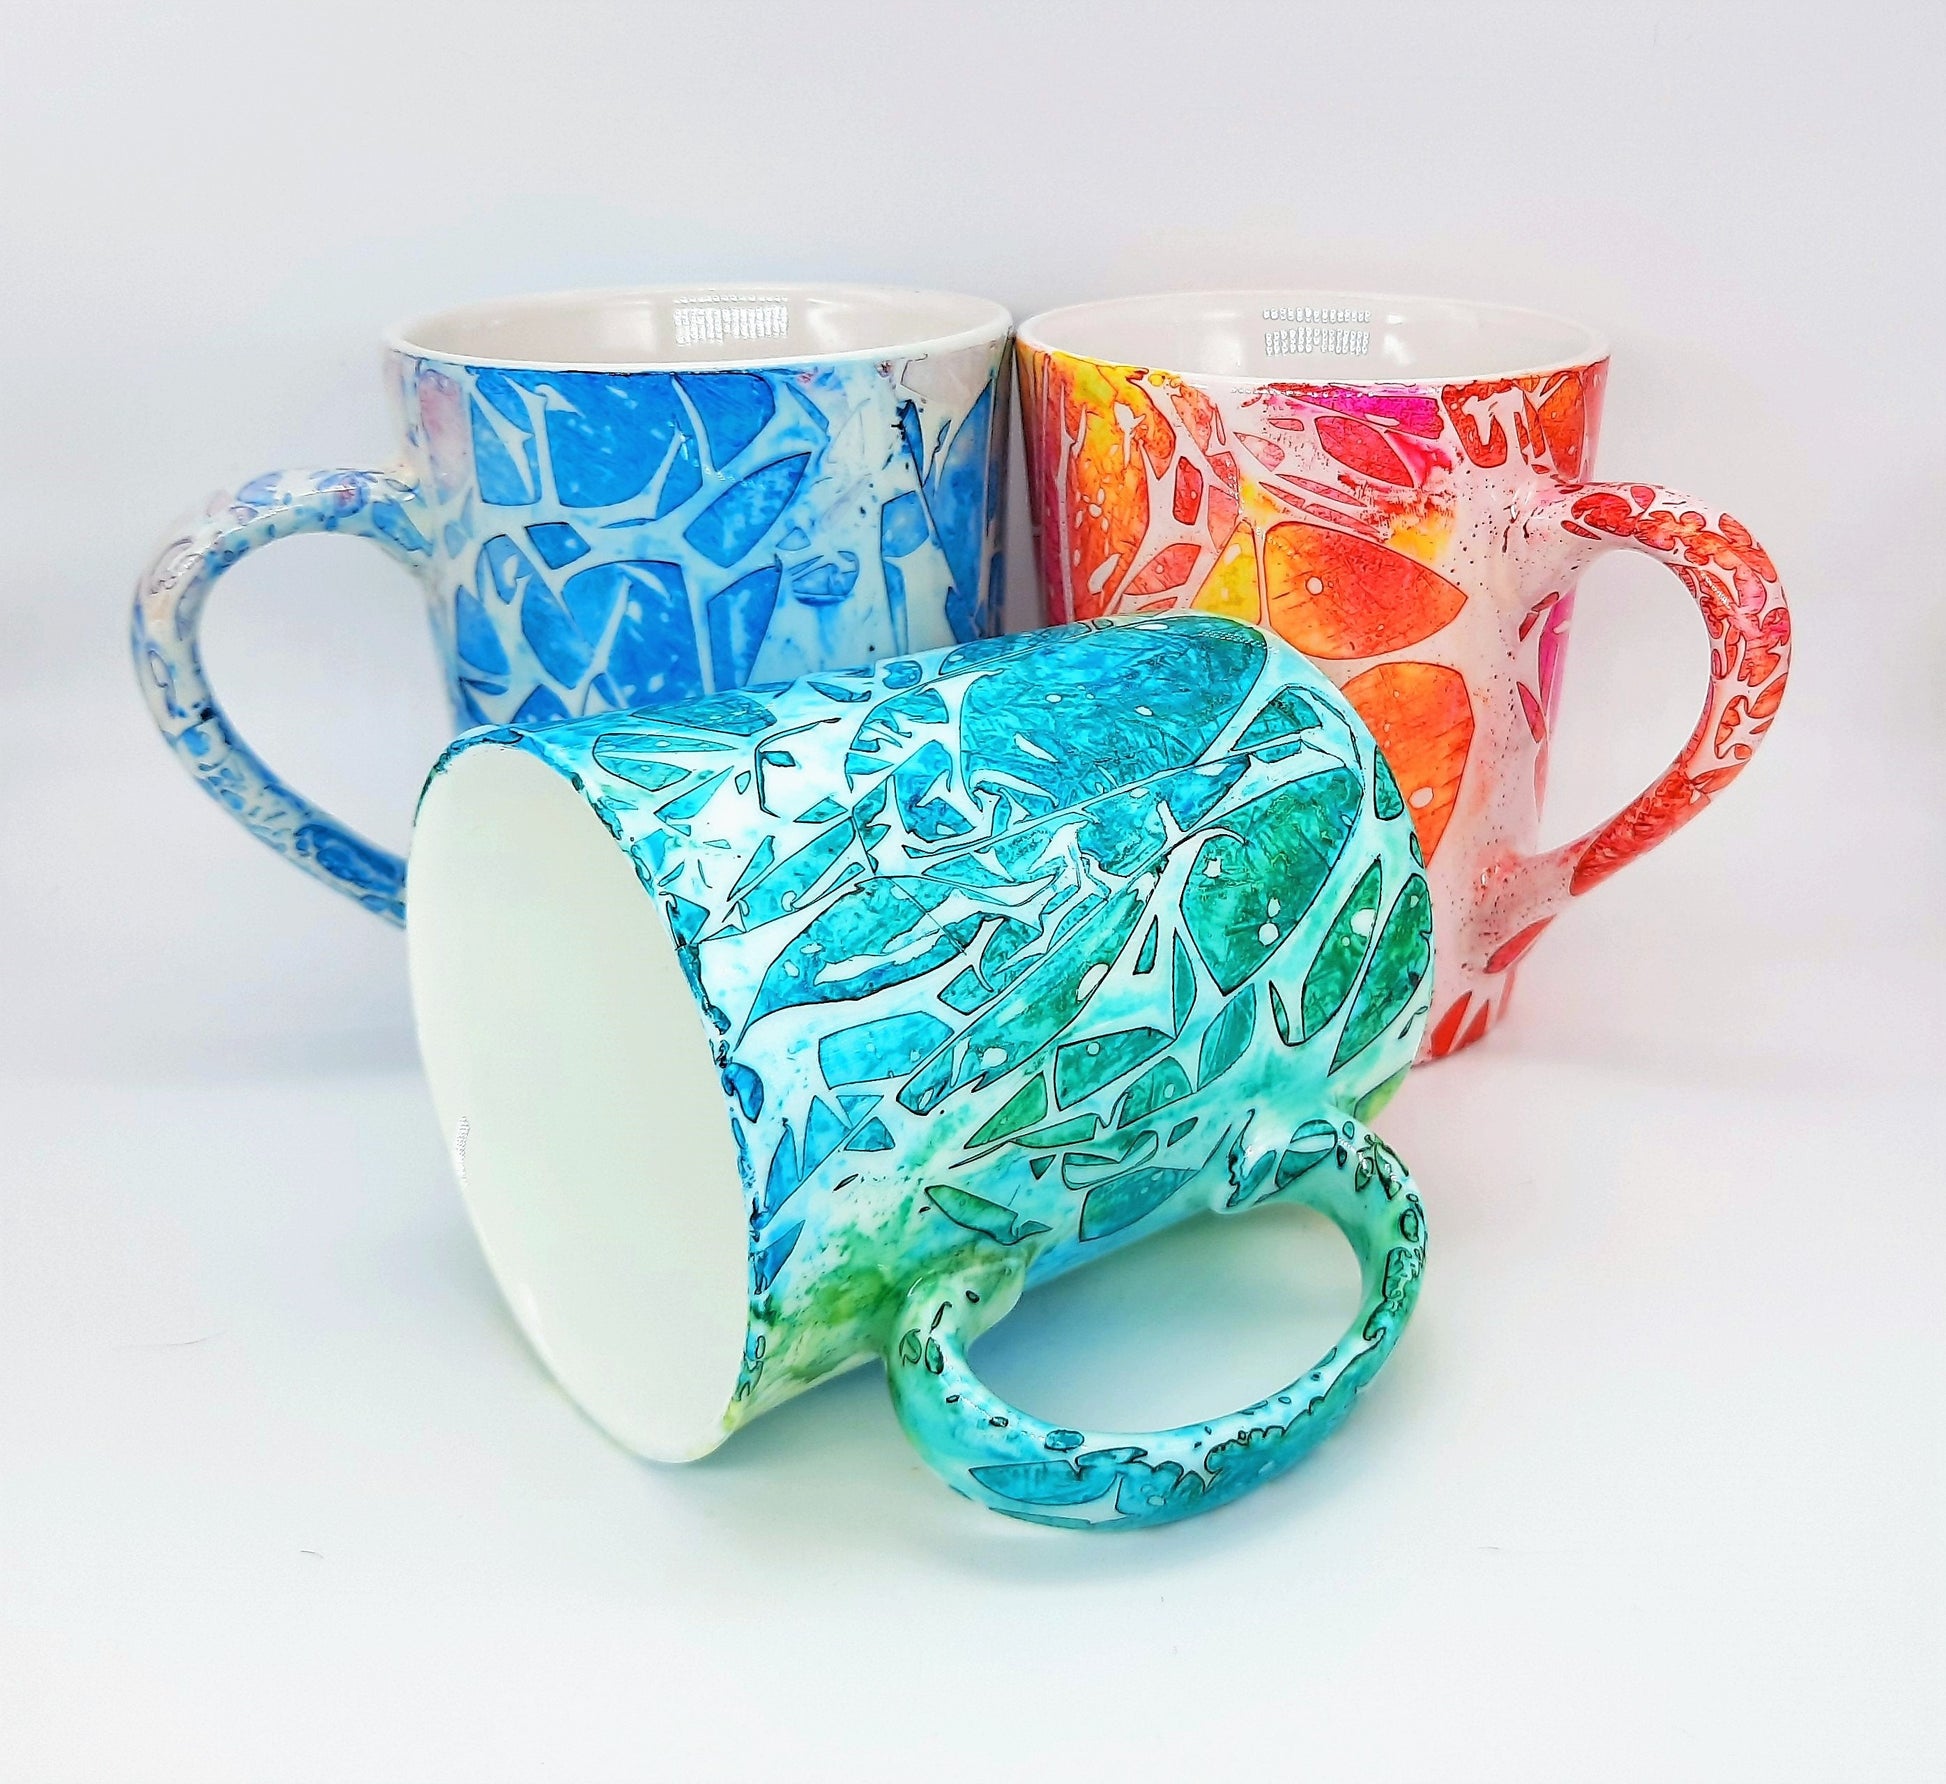 Blue Abstract Alcohol Ink 12 oz Ceramic Coffee Mug, Handpainted and Sealed with Resin, One of a Kind, Unique, Bright